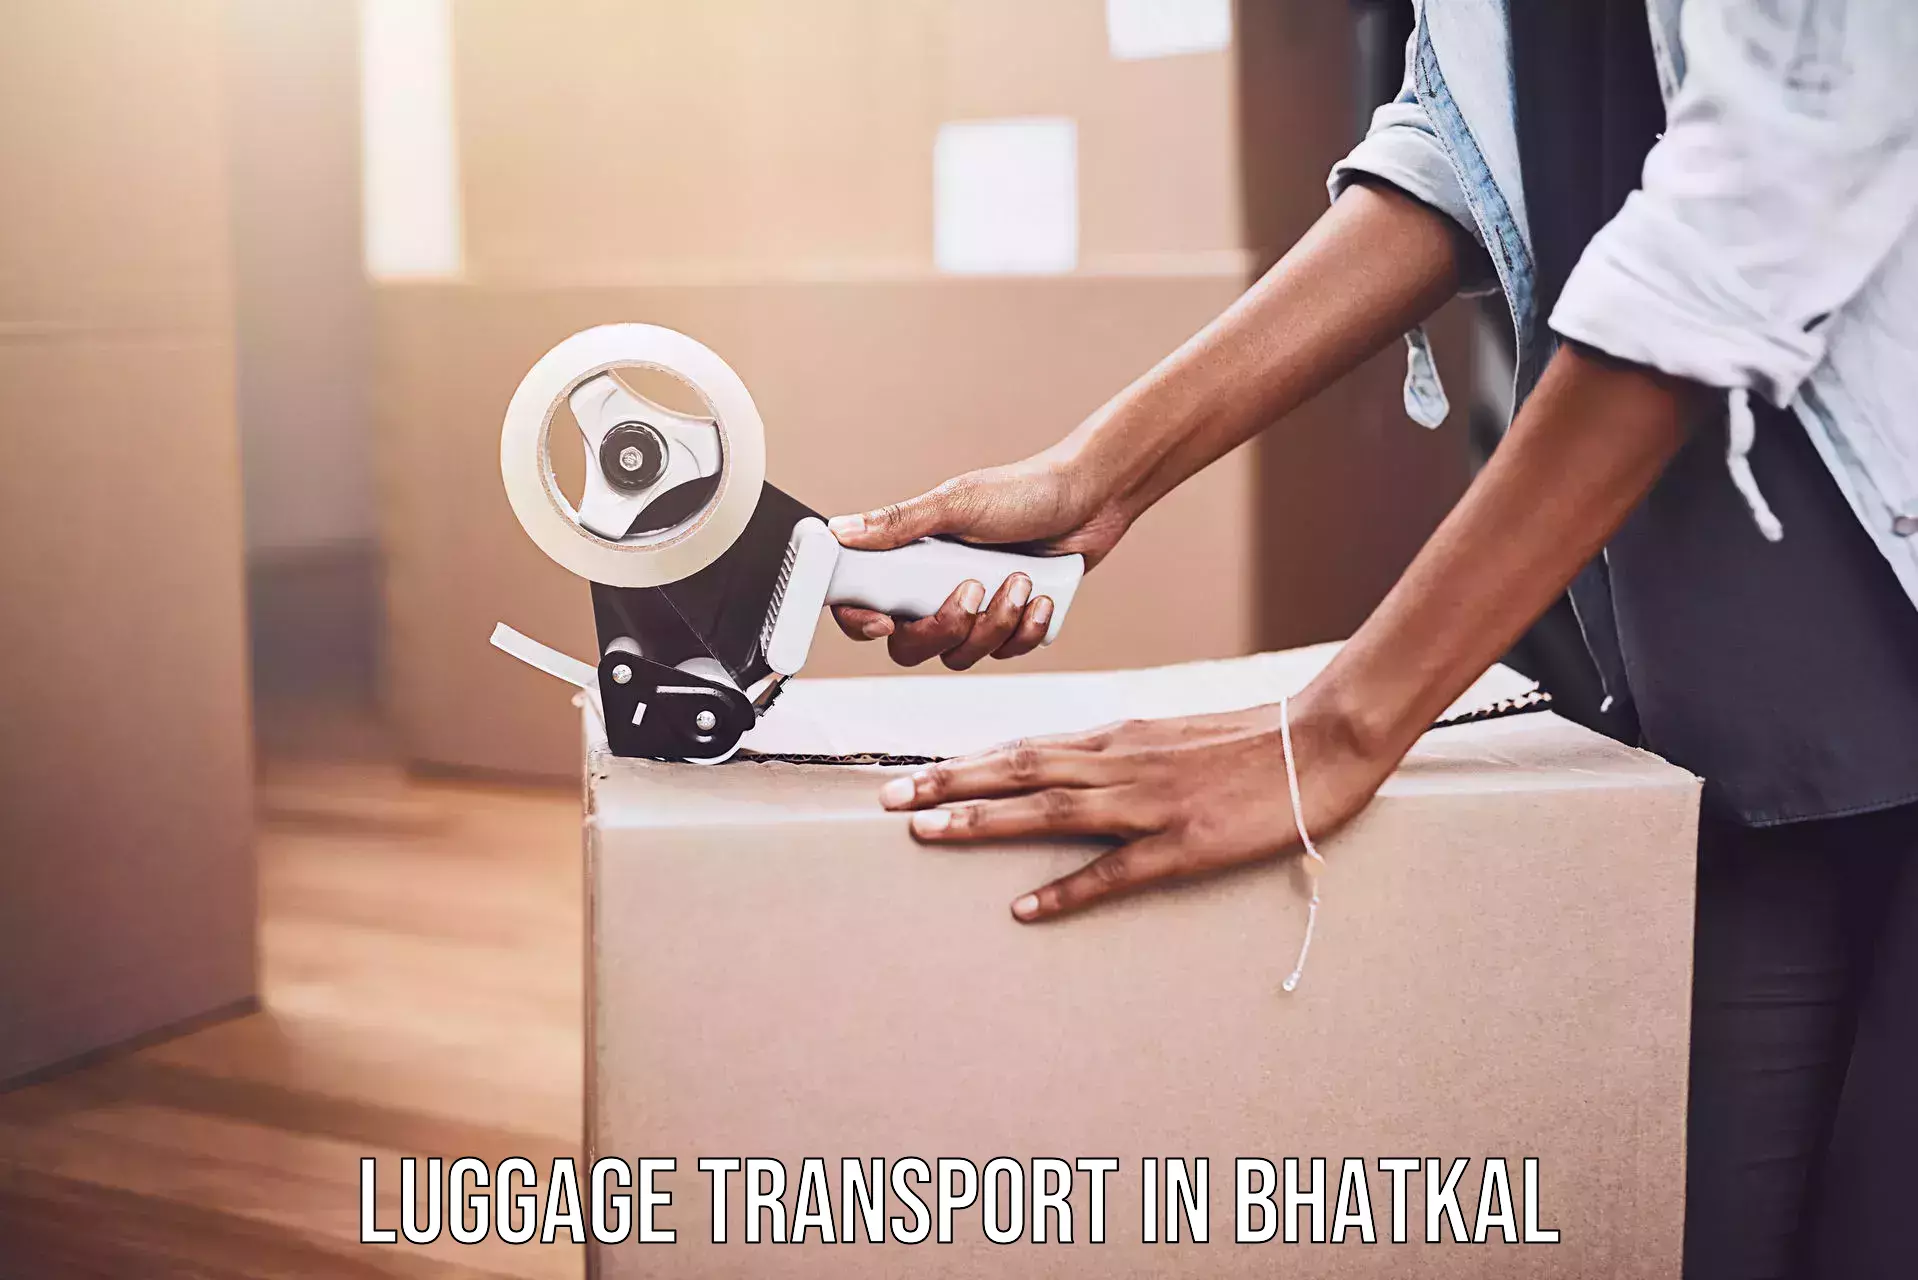 Baggage transport network in Bhatkal